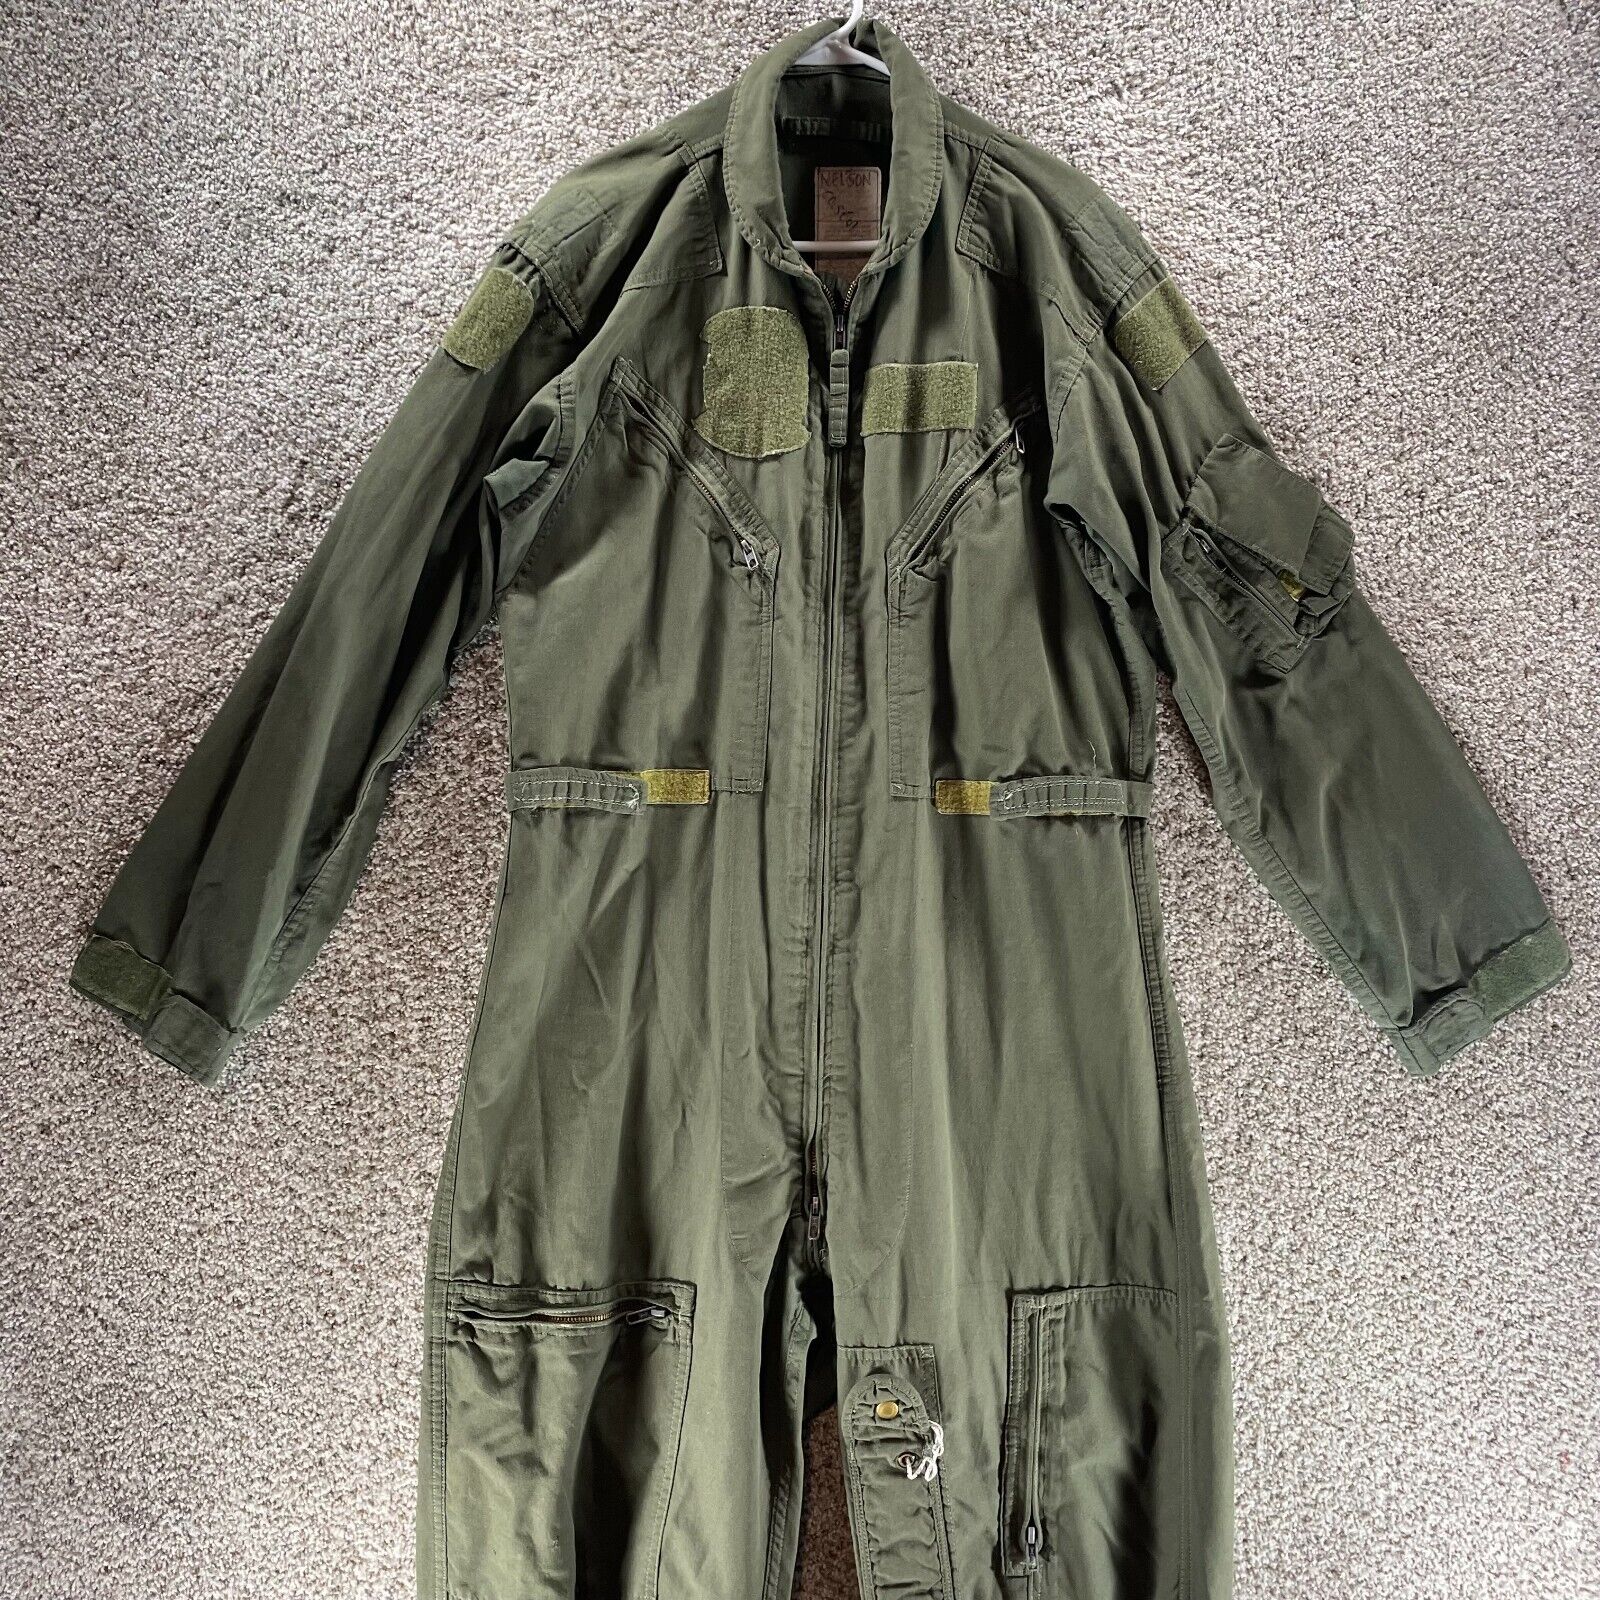 US Military Flight Suit Mens 44R Sage Green Air Force Flyers CWU-27/P Coveralls